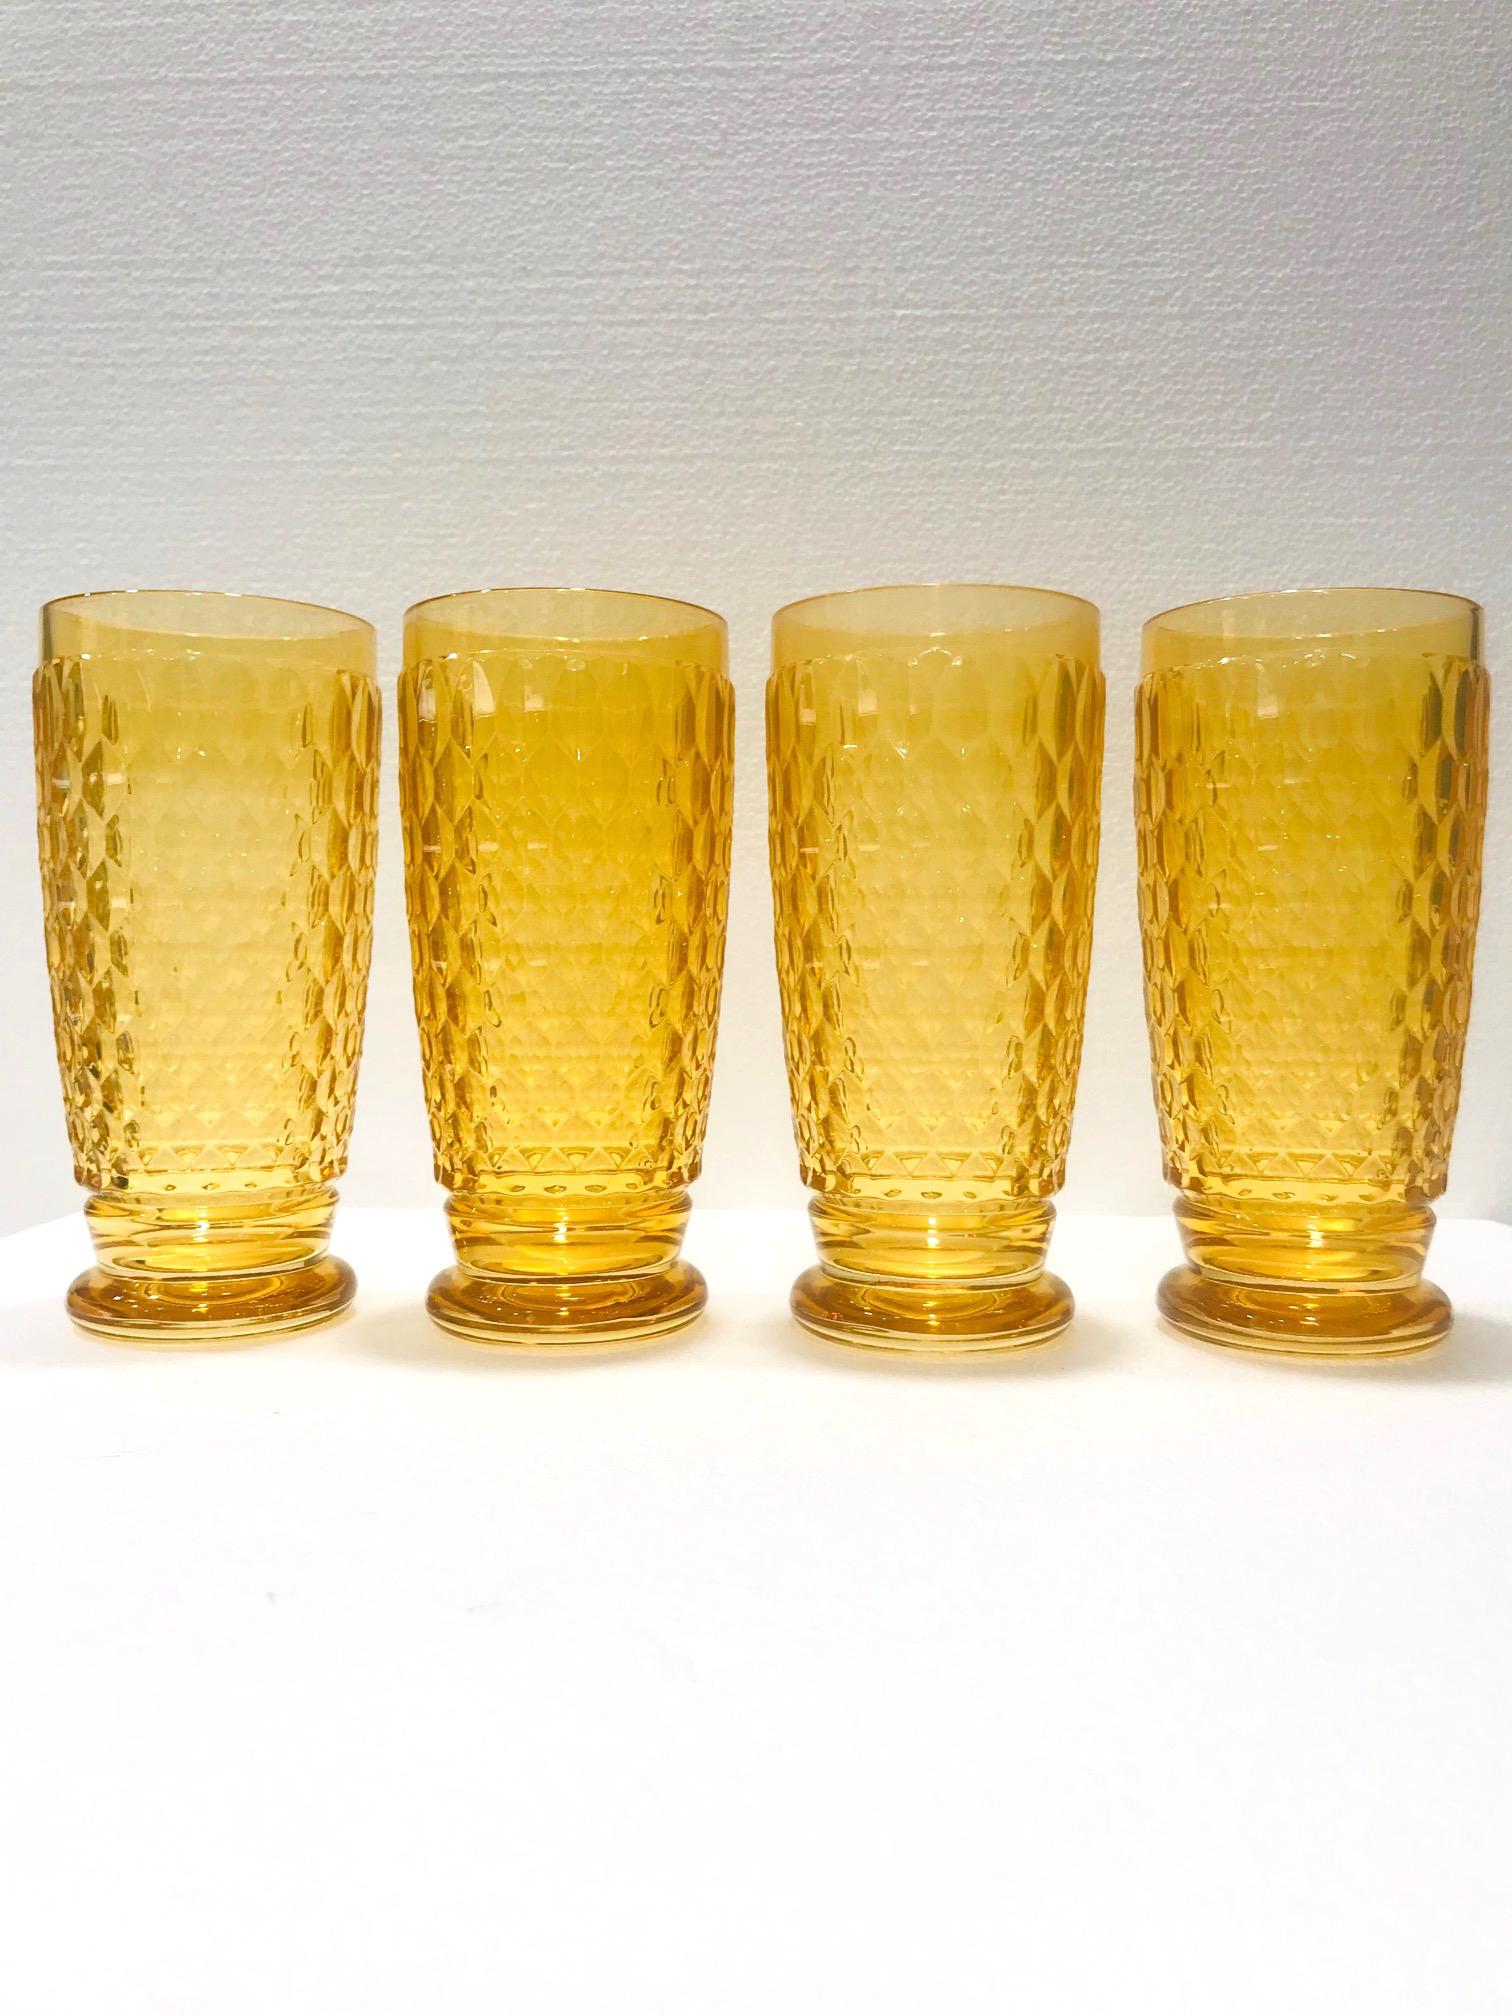 Contemporary Set of Seven Villeroy & Boch Crystal Highball Glasses in Amber Yellow circa 2005